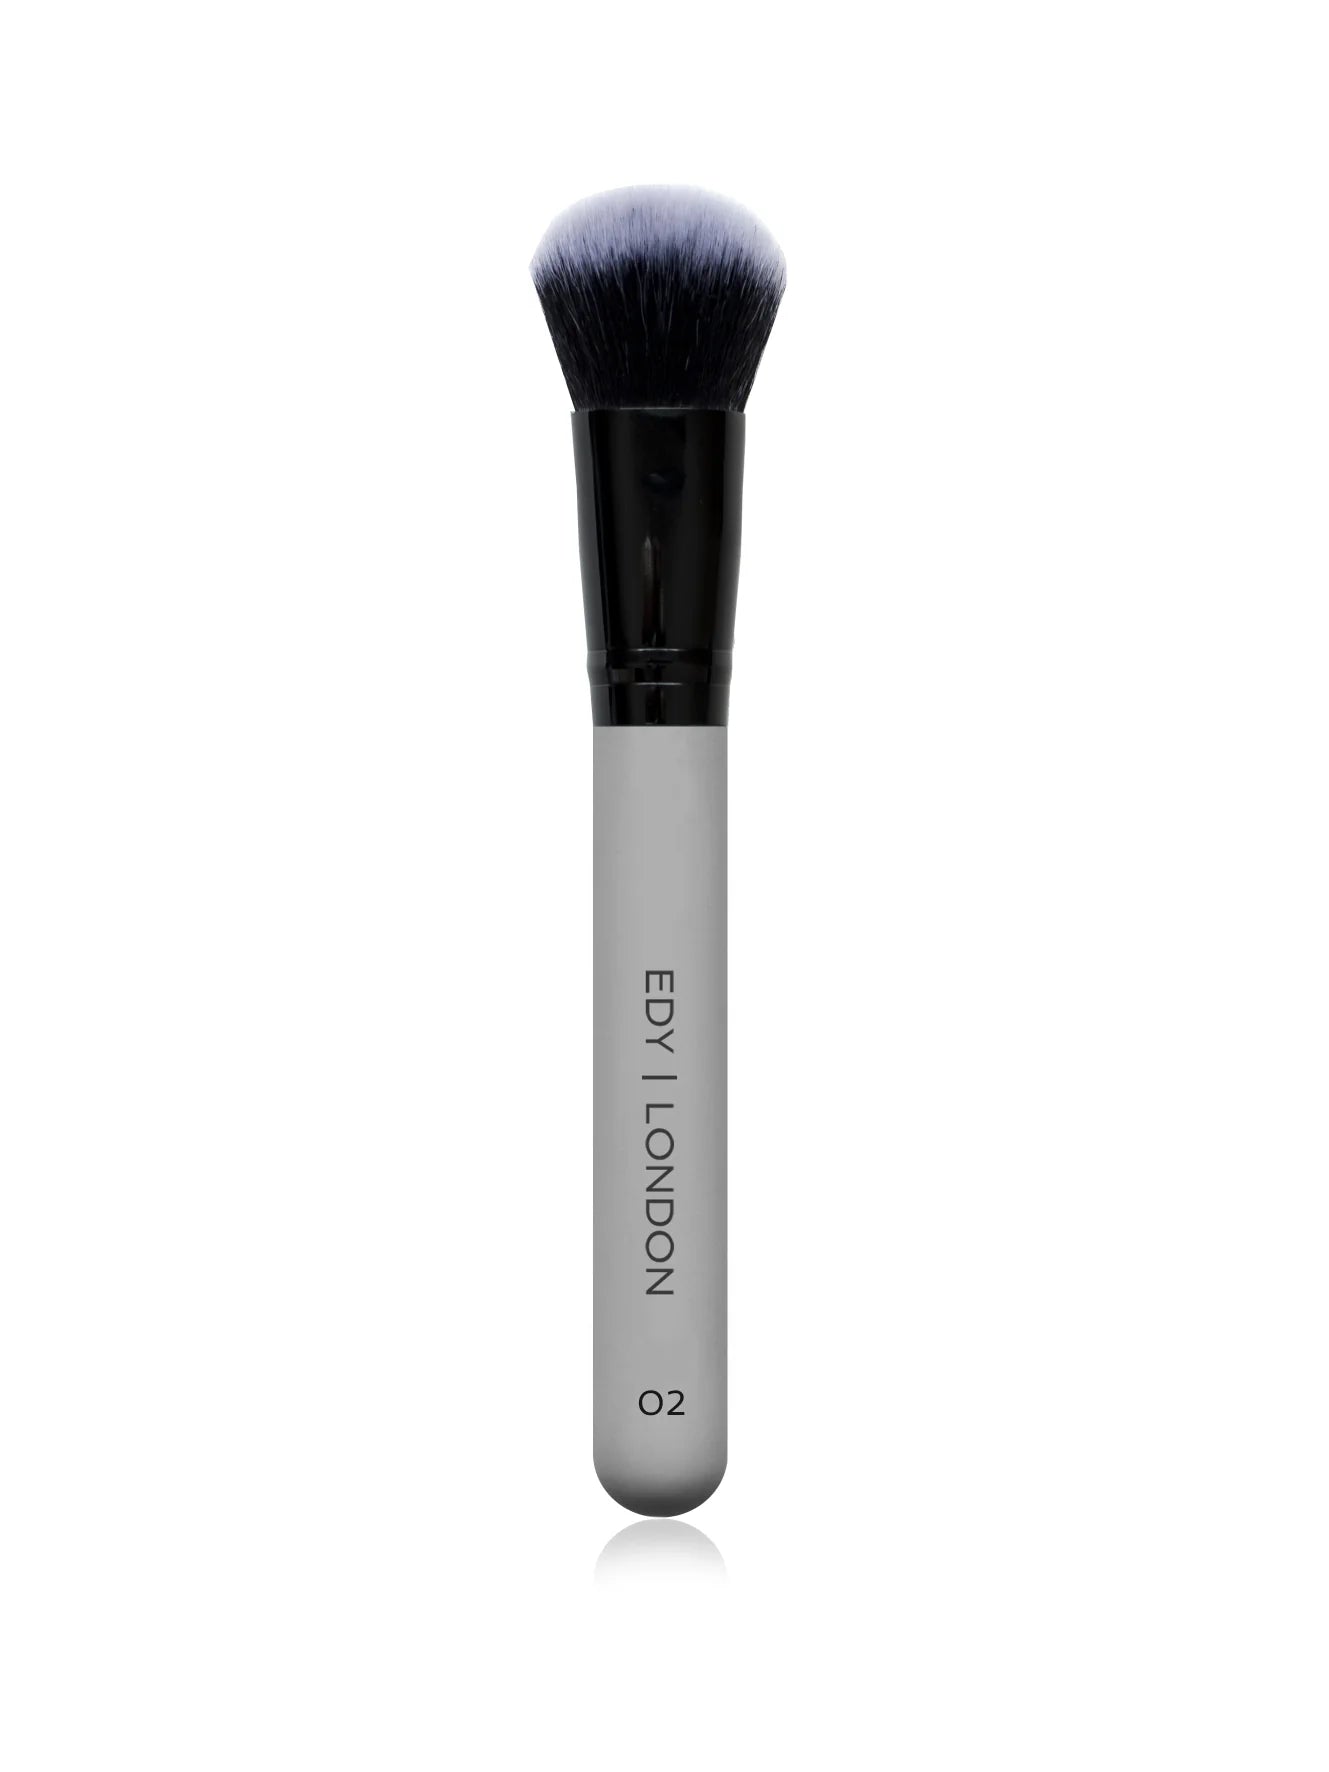 Contour and Sculpt Expert Face Brush 02 Make-up Brush EDY LONDON Cool Grey   - EDY LONDON PRODUCTS UK - The Best Makeup Brushes - shop.edy.london